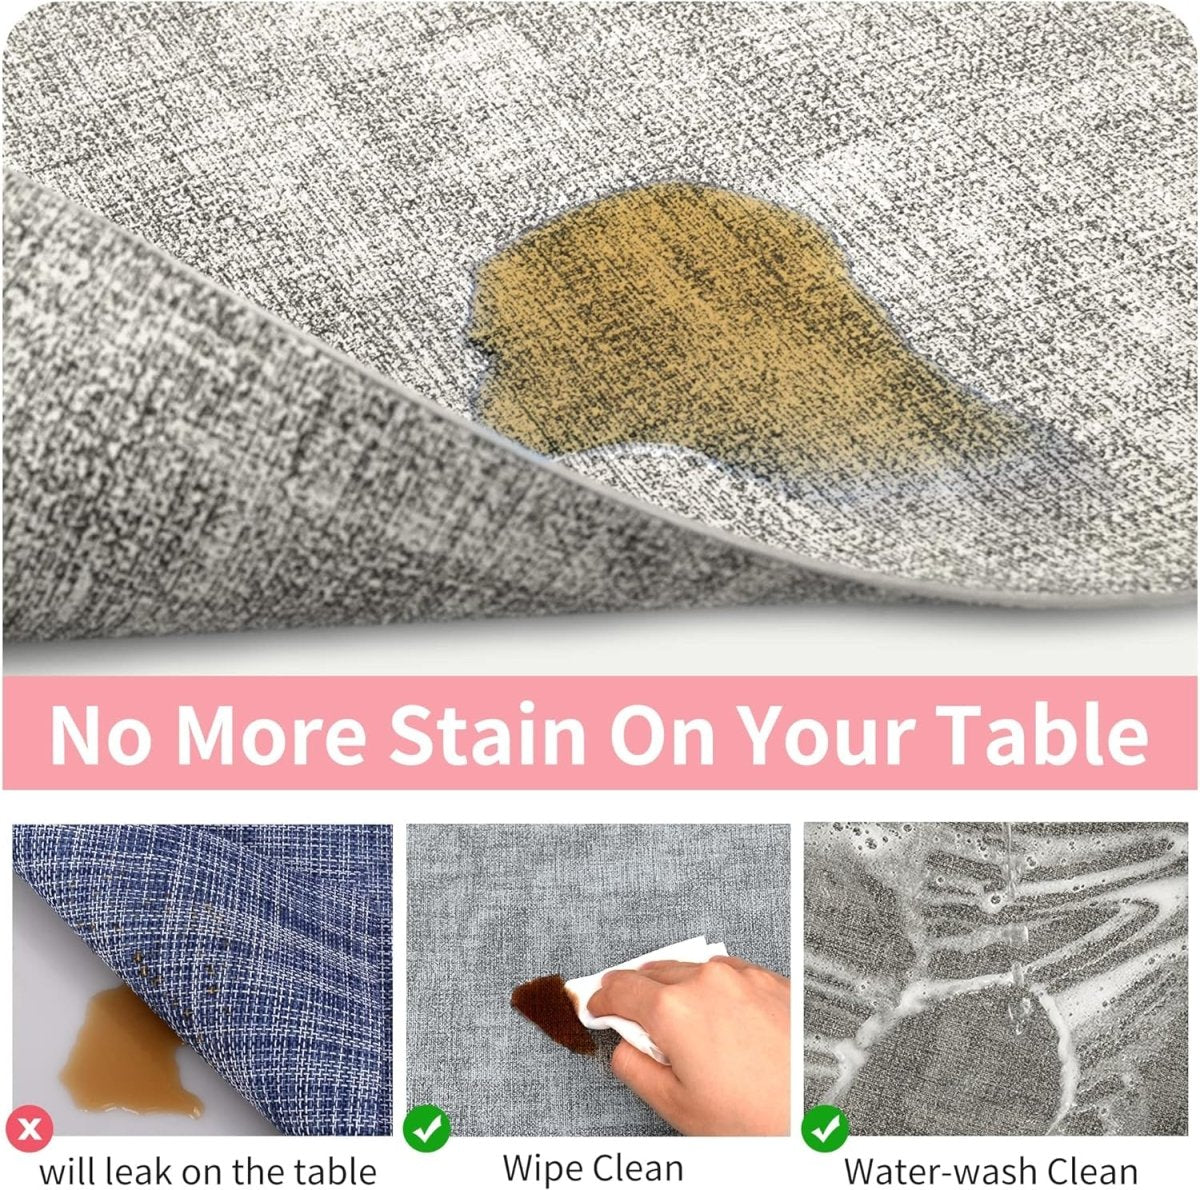 Textured Leather Placemats Set of 6 - Waterproof - Wipe Clean Dining Table Mats, 45cmx30cm Dining Table Placemats- #Royalkart#kitchen mats